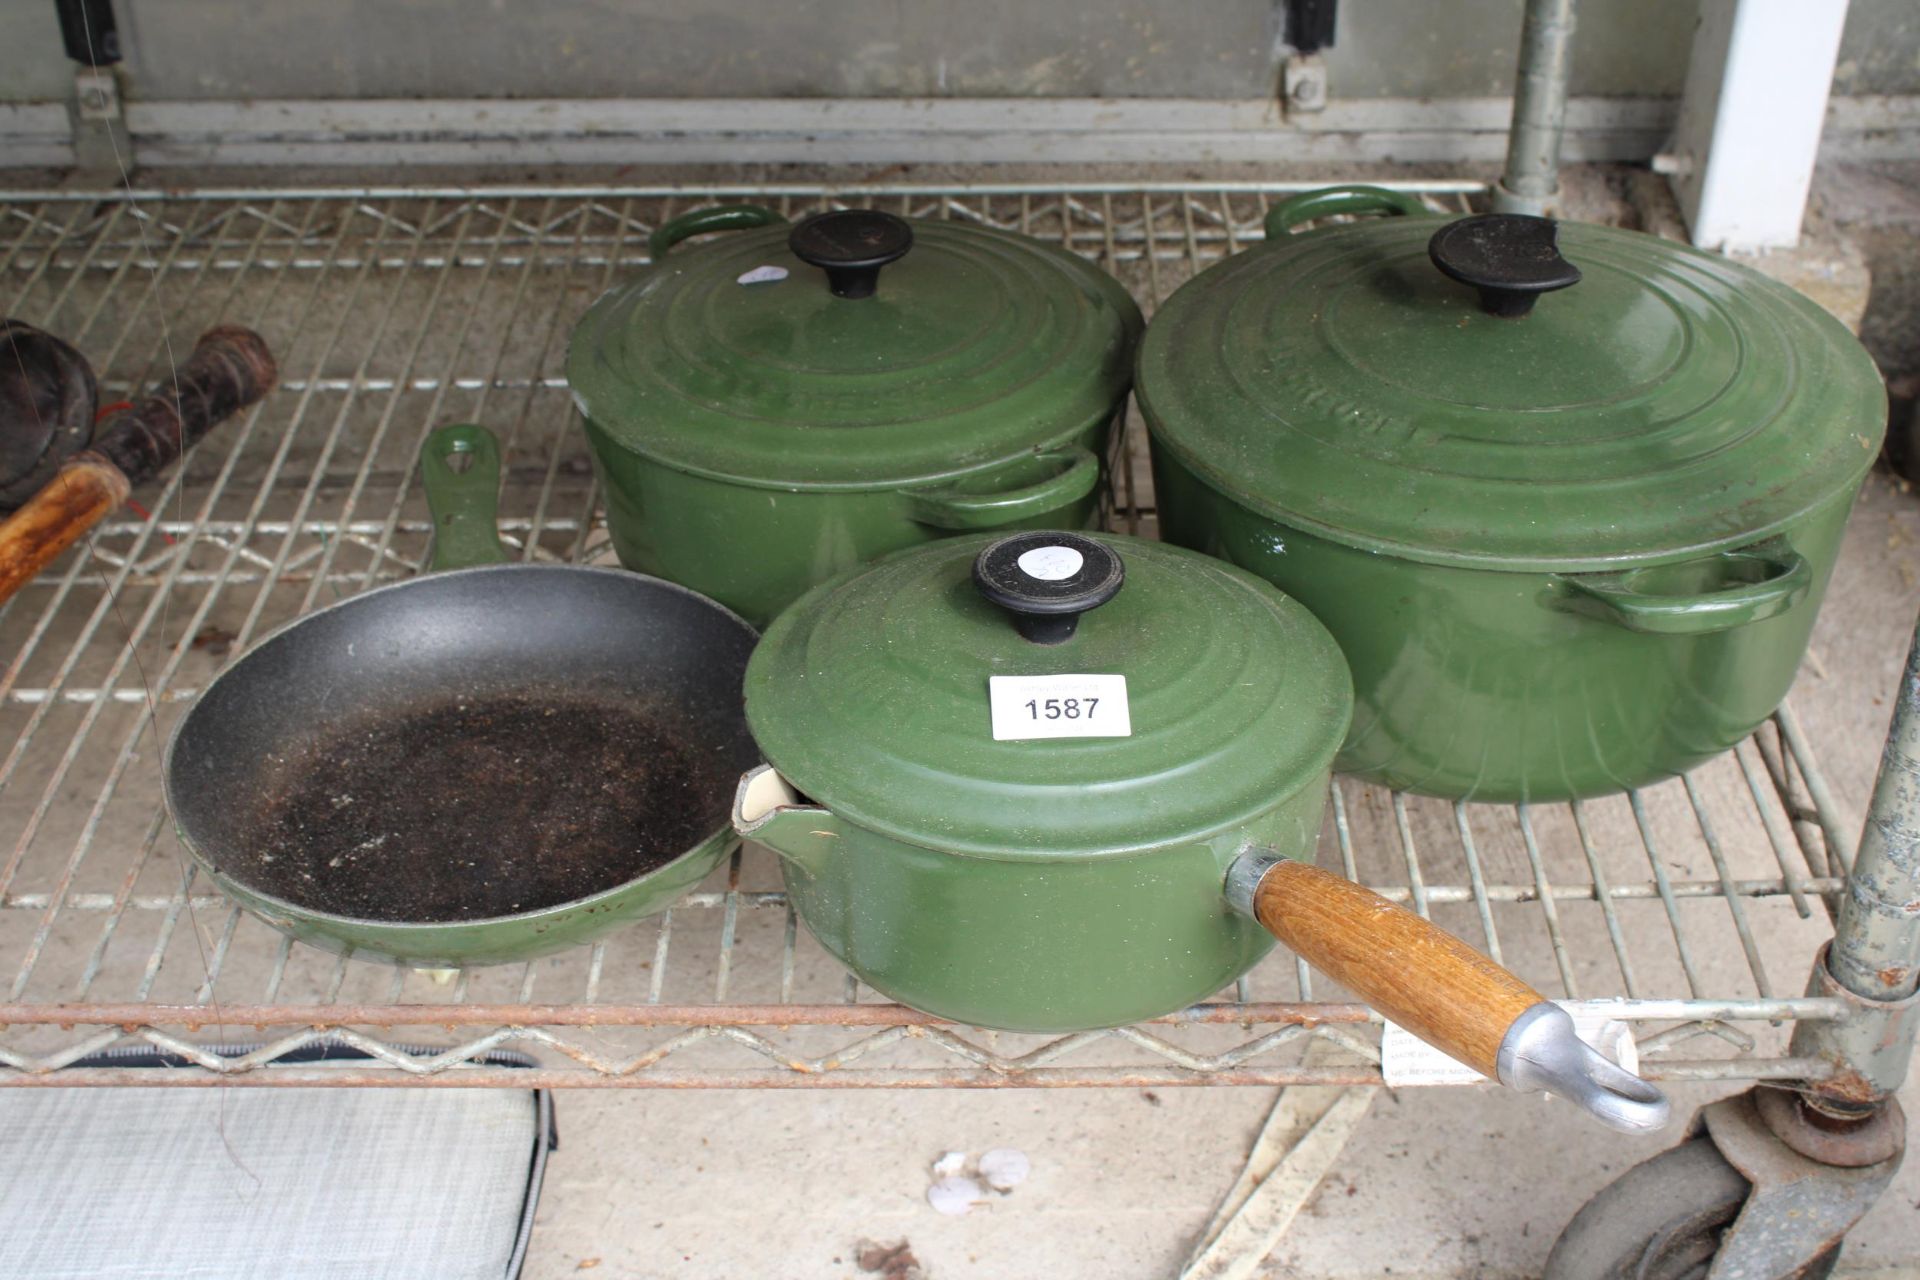 FOUR GREEN LE CREUSET PANS, ONE FRYING PAN AND THREE WITH LIDS